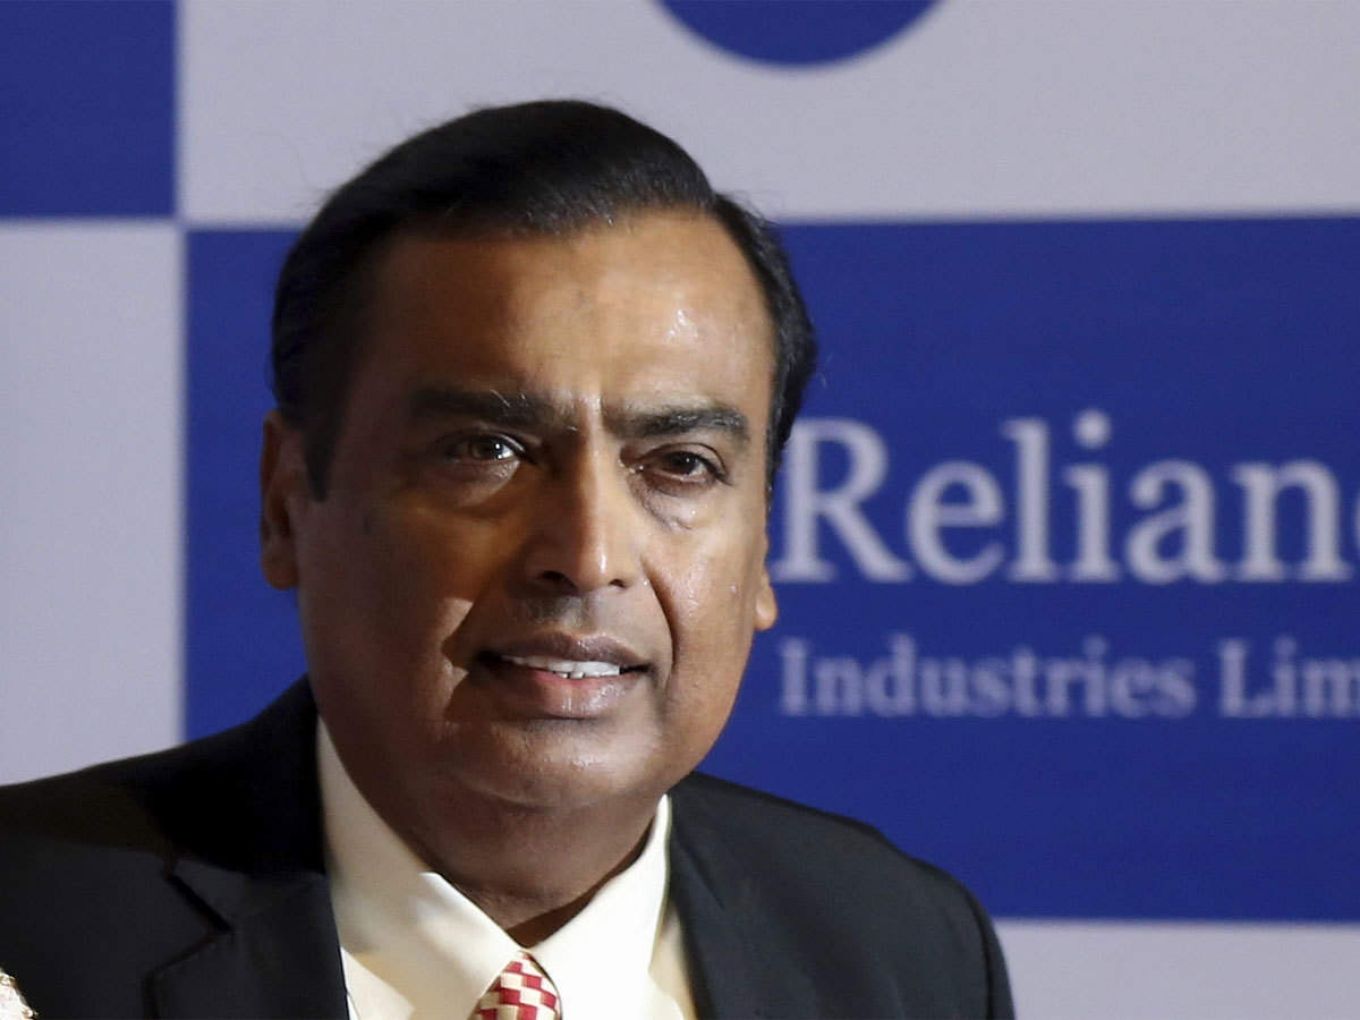 Amazon May Buy 40% Stake In Reliance Retail For $40 Bn